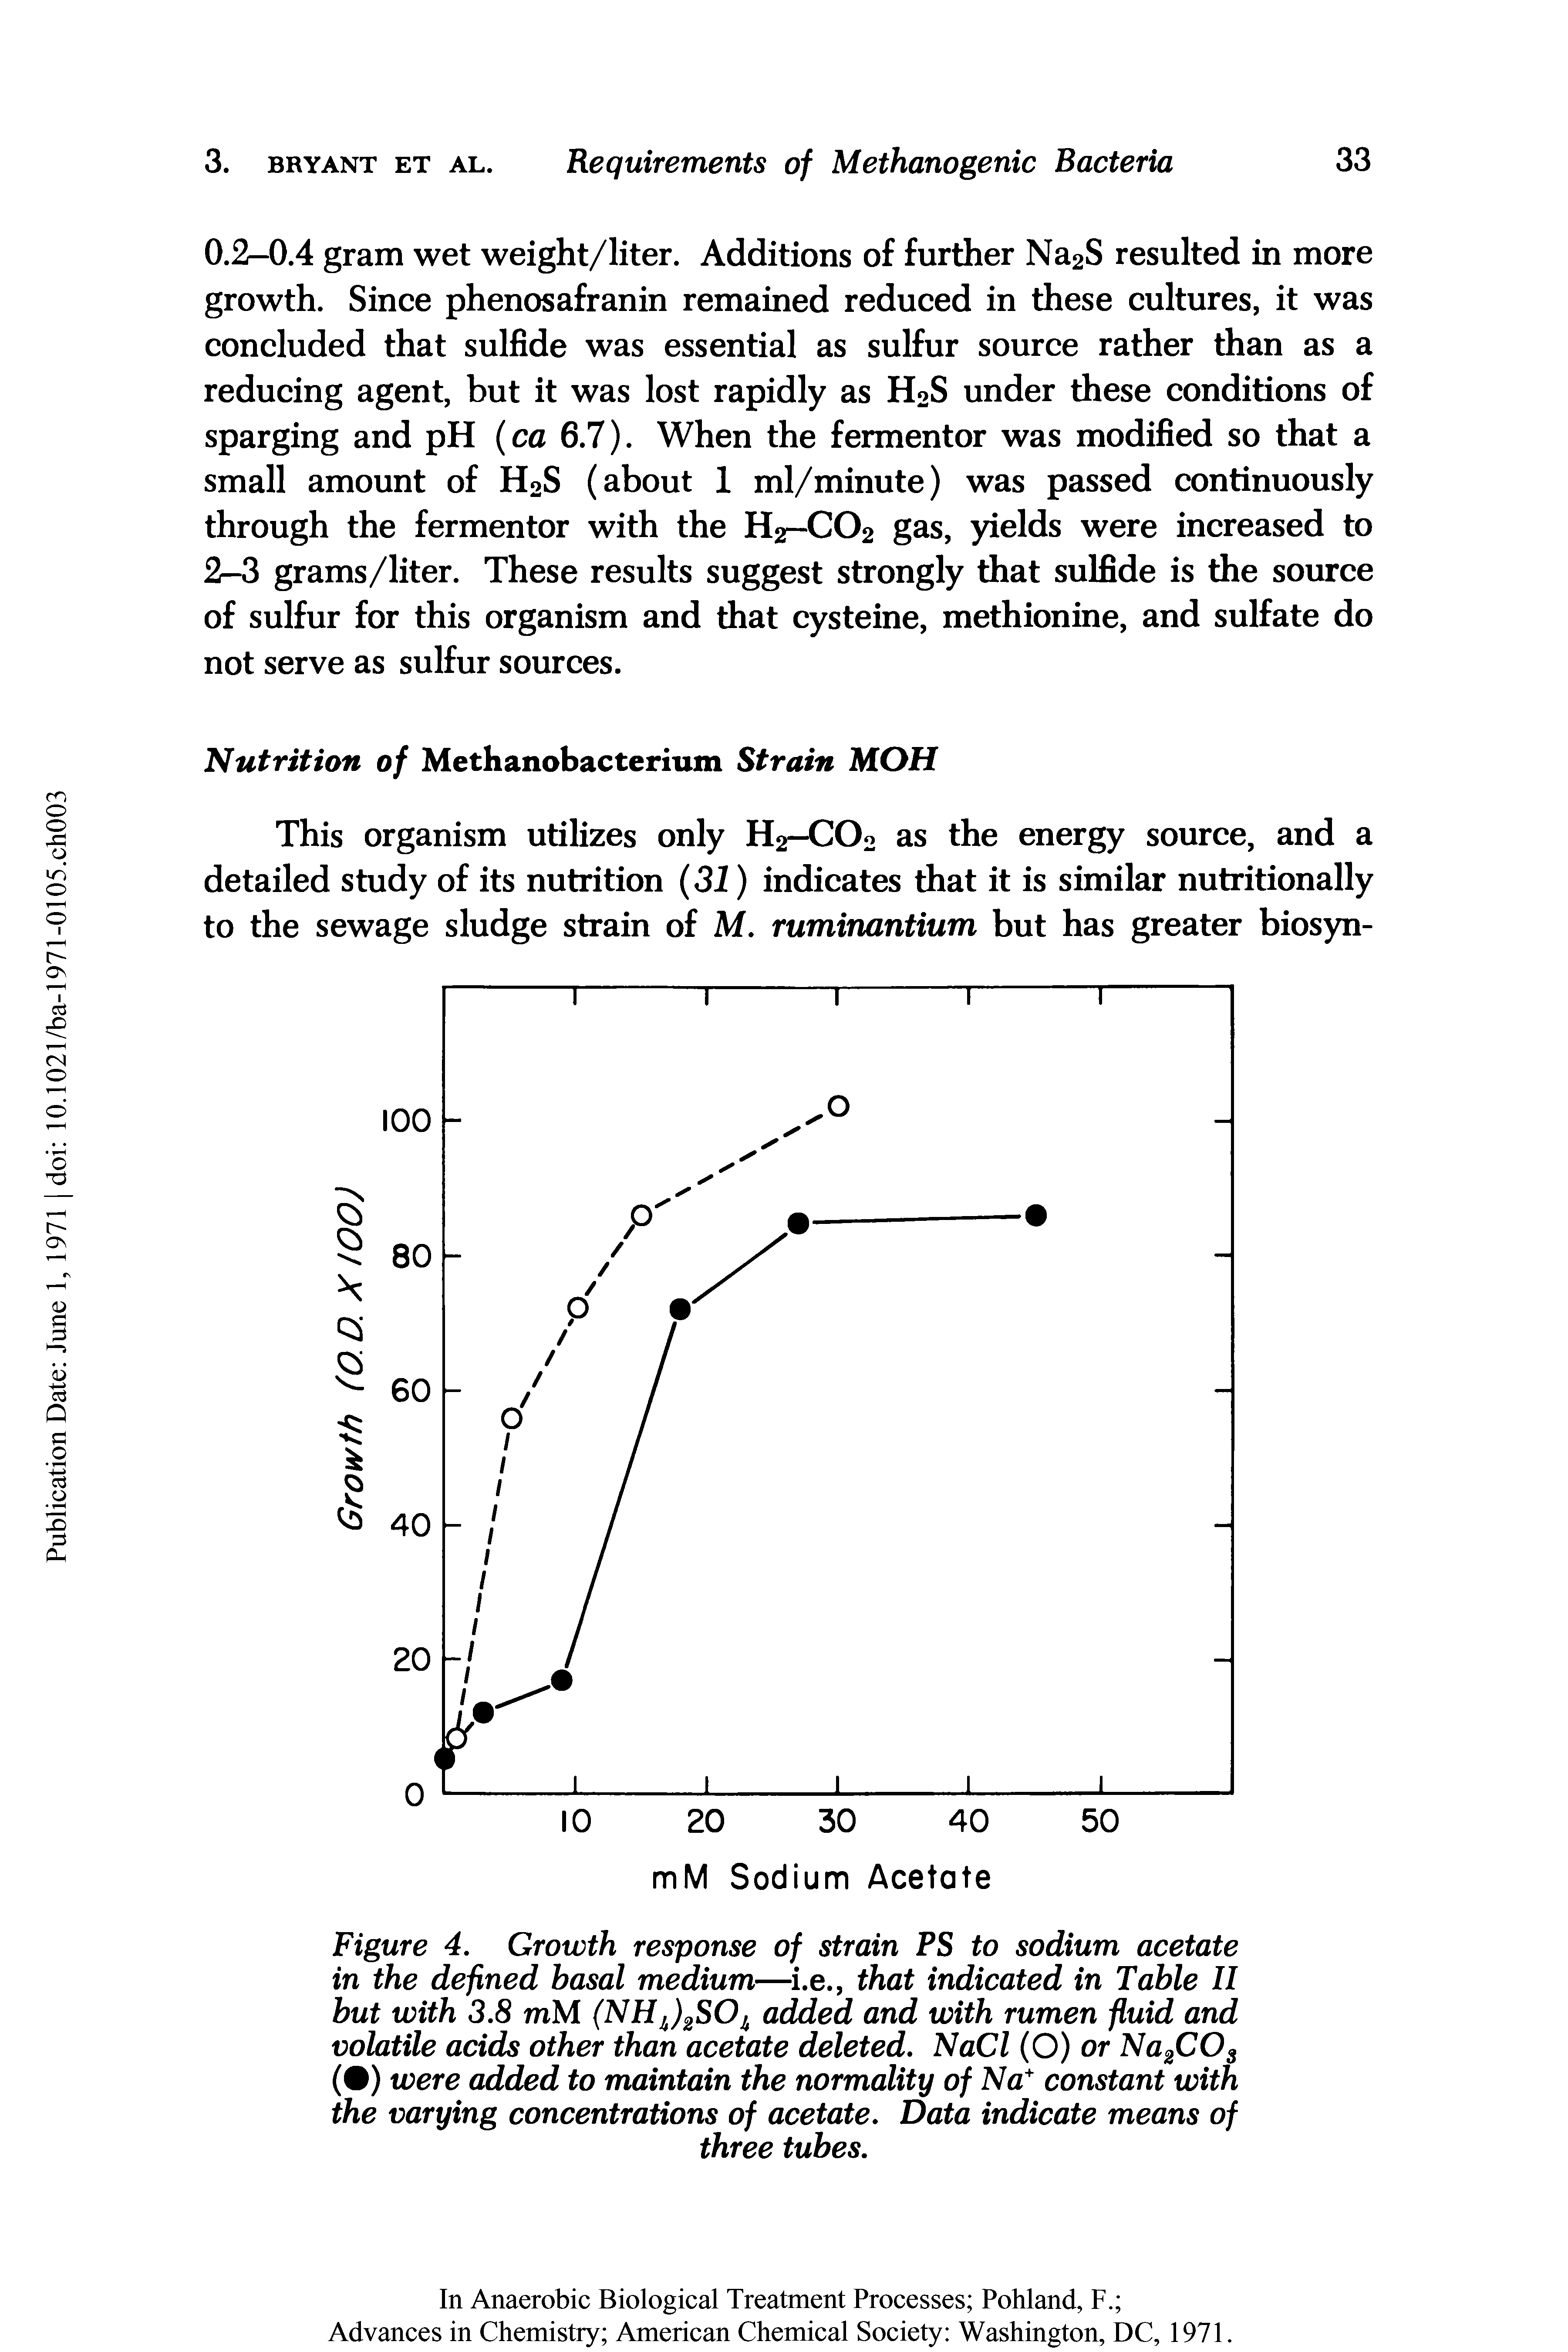 Figure 4. Growth response of strain PS to sodium acetate in the defined basal medium—i.e., that indicated in Table II but with 3.8 mM (NH 1 )280added and with rumen fluid and volatile acids other than acetate deleted. NaCl (O) or Na2COg ( ) were added to maintain the normality of Na constant with the varying concentrations of acetate. Data indicate means of three tubes.